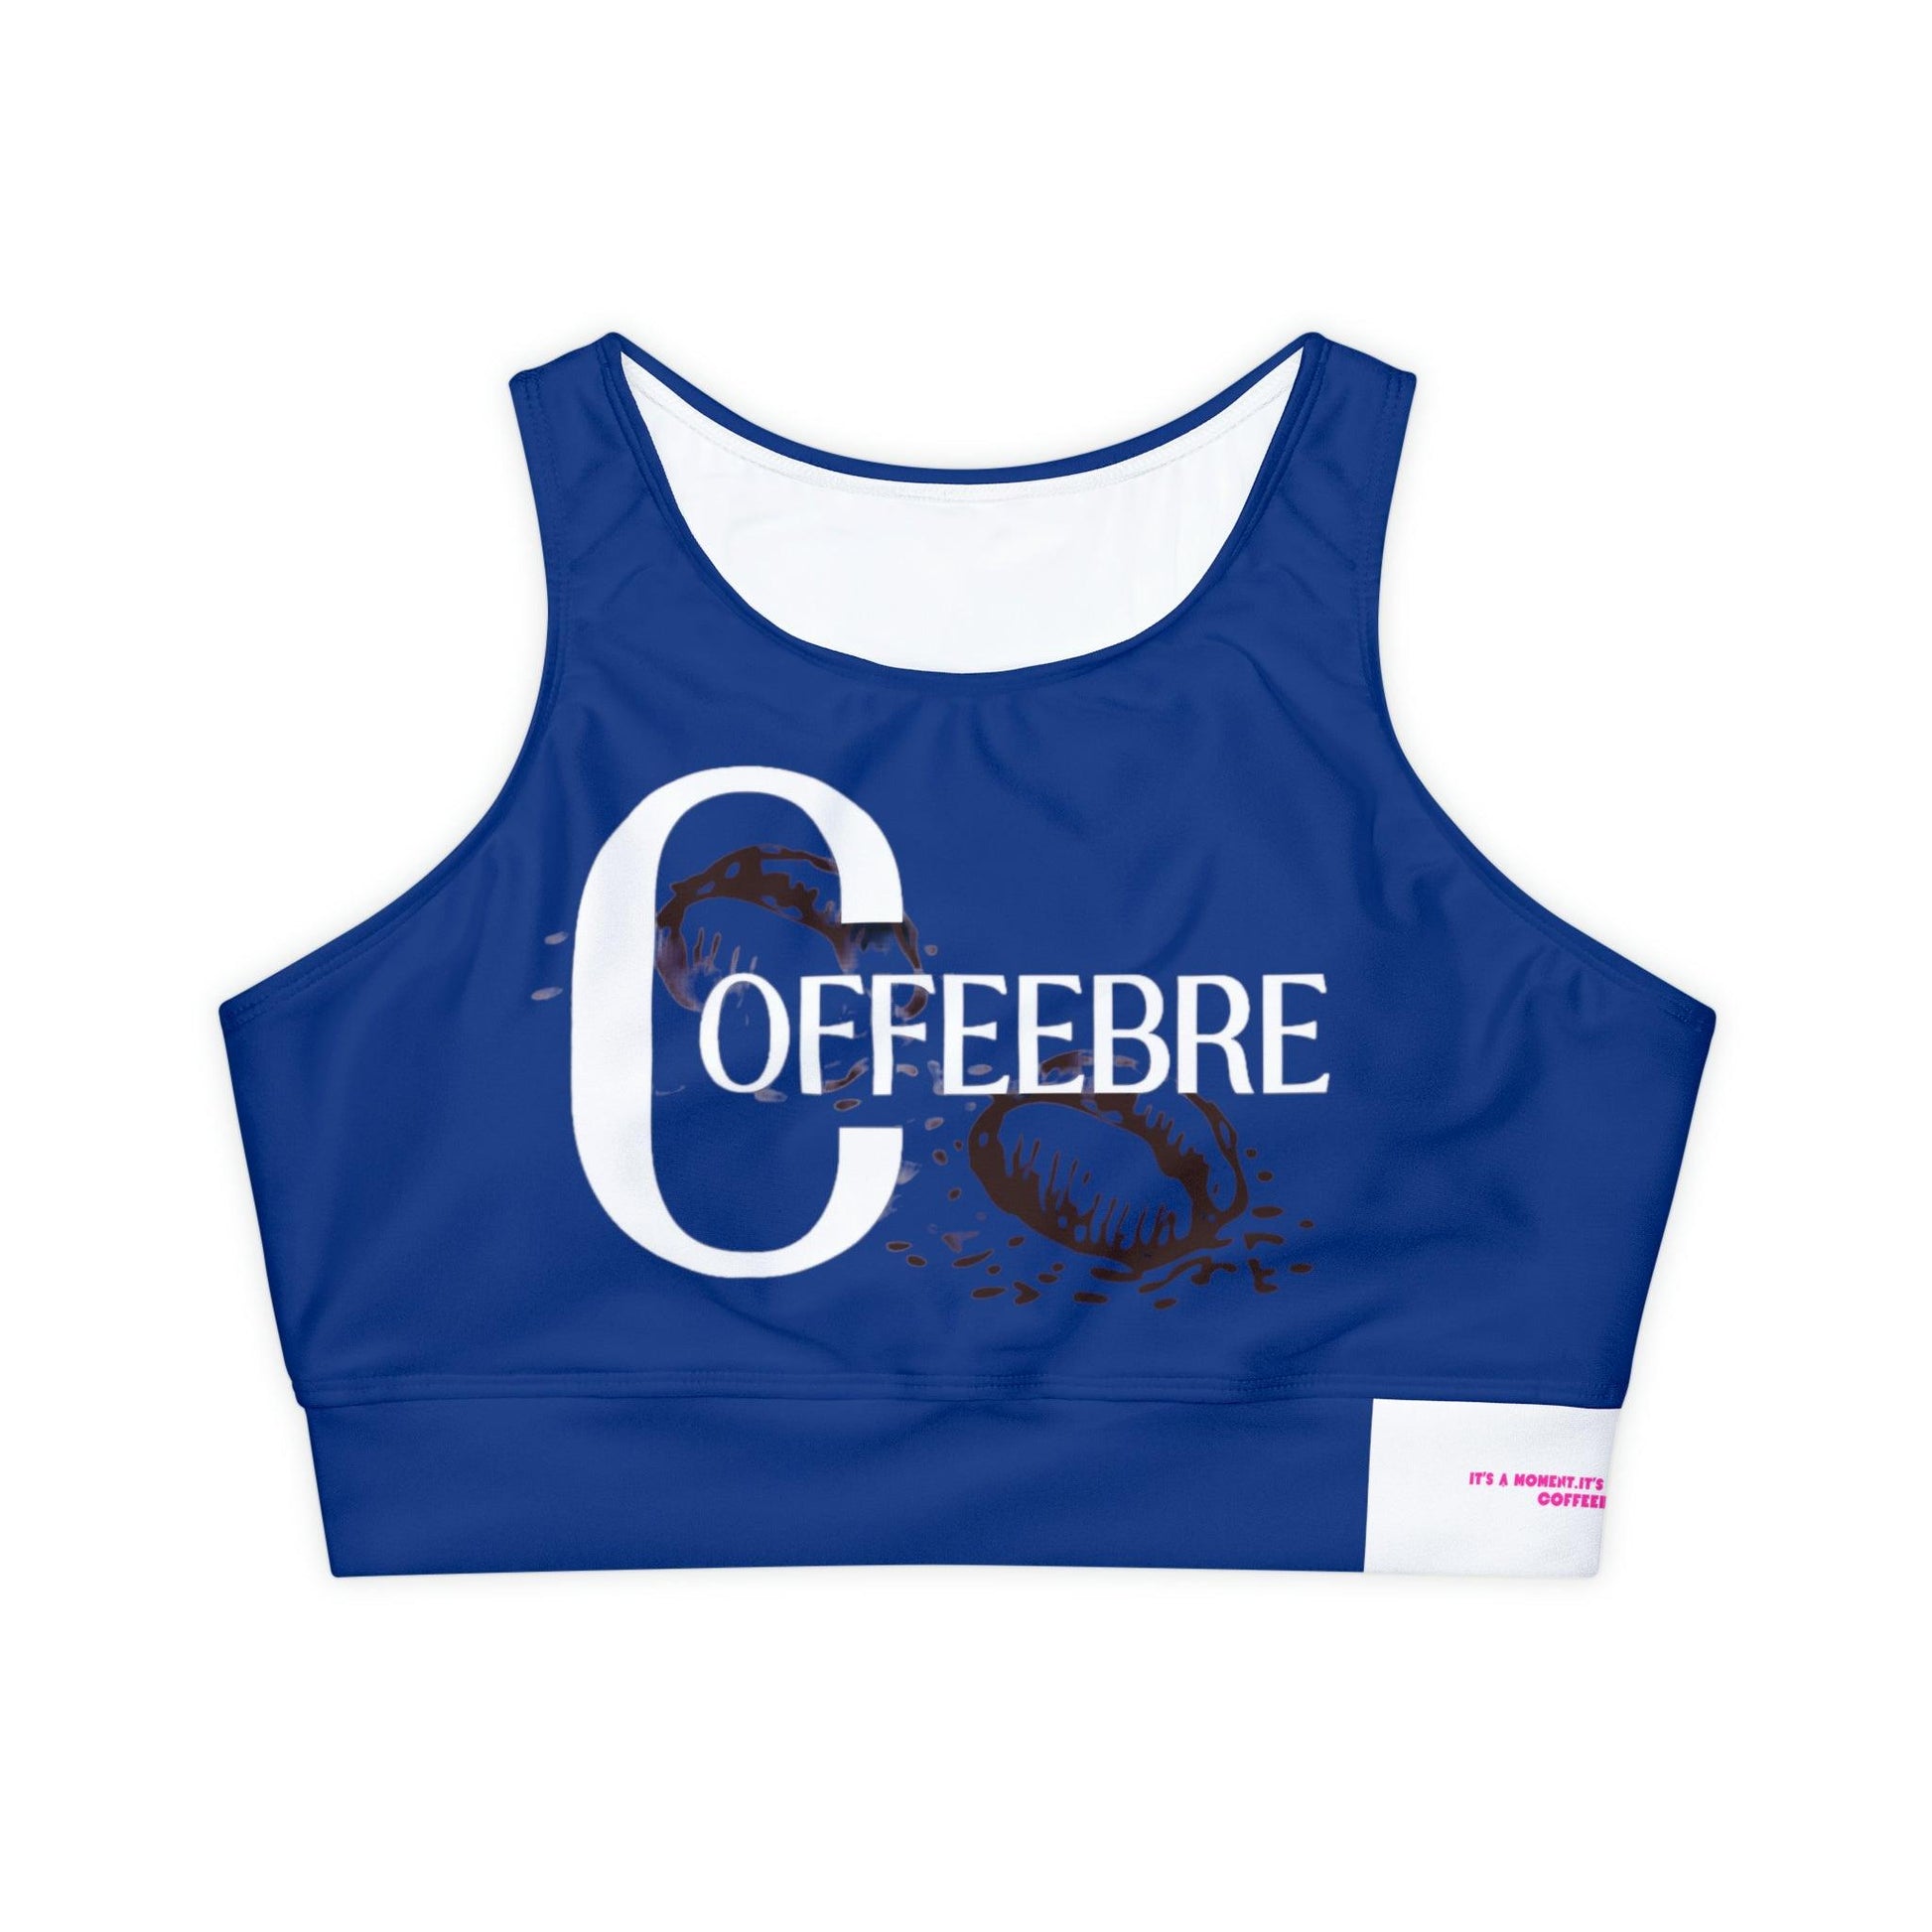 Navy Blue Fully Lined, Padded Sports Bra - COFFEEBRE